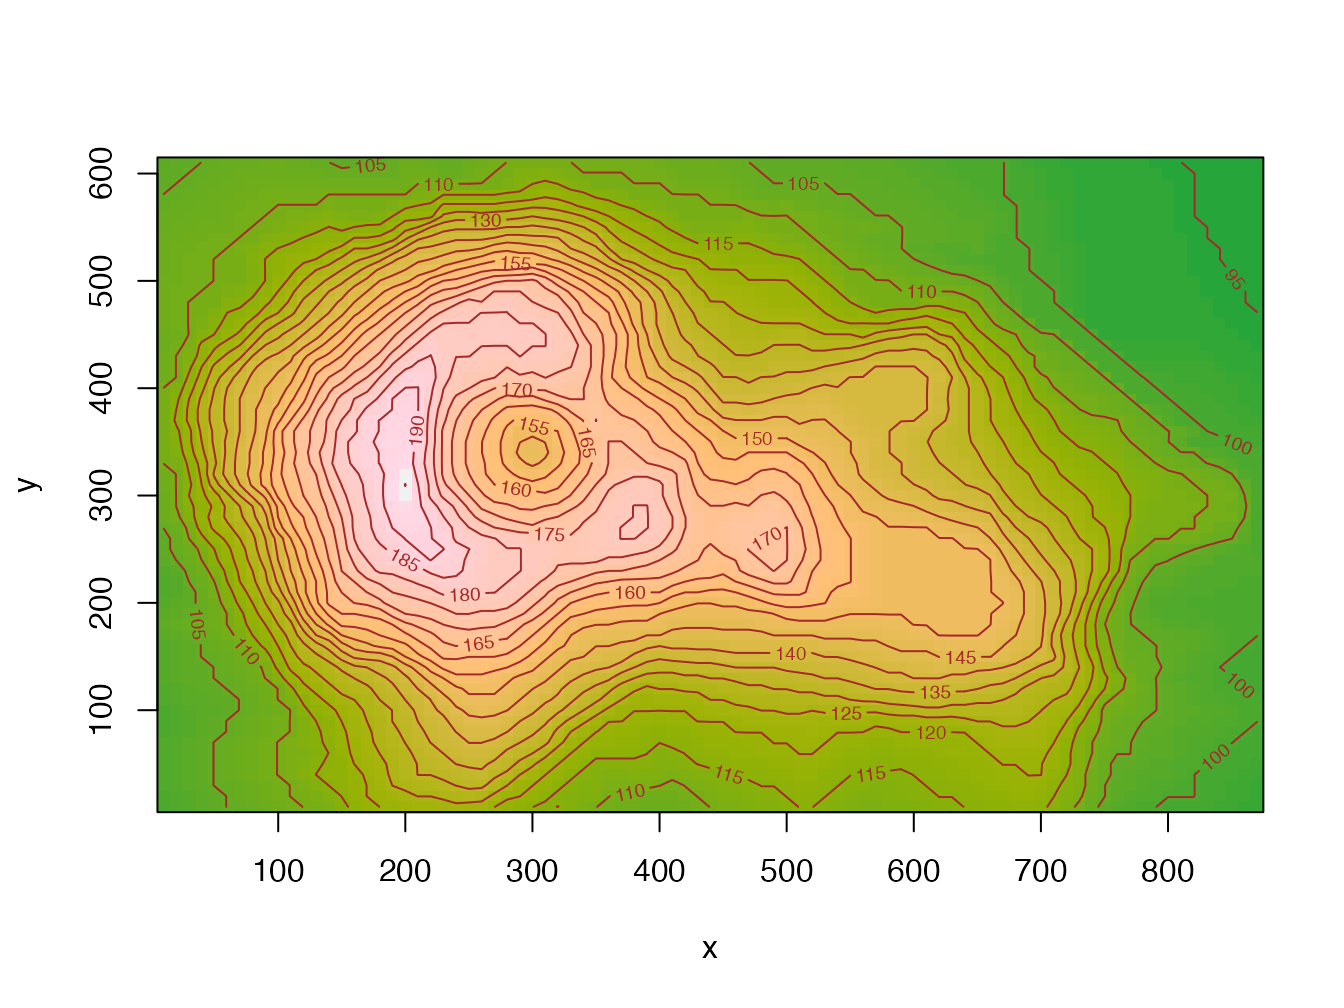 Maunga Whau volcano contours, code provided as an example of the image() function help.